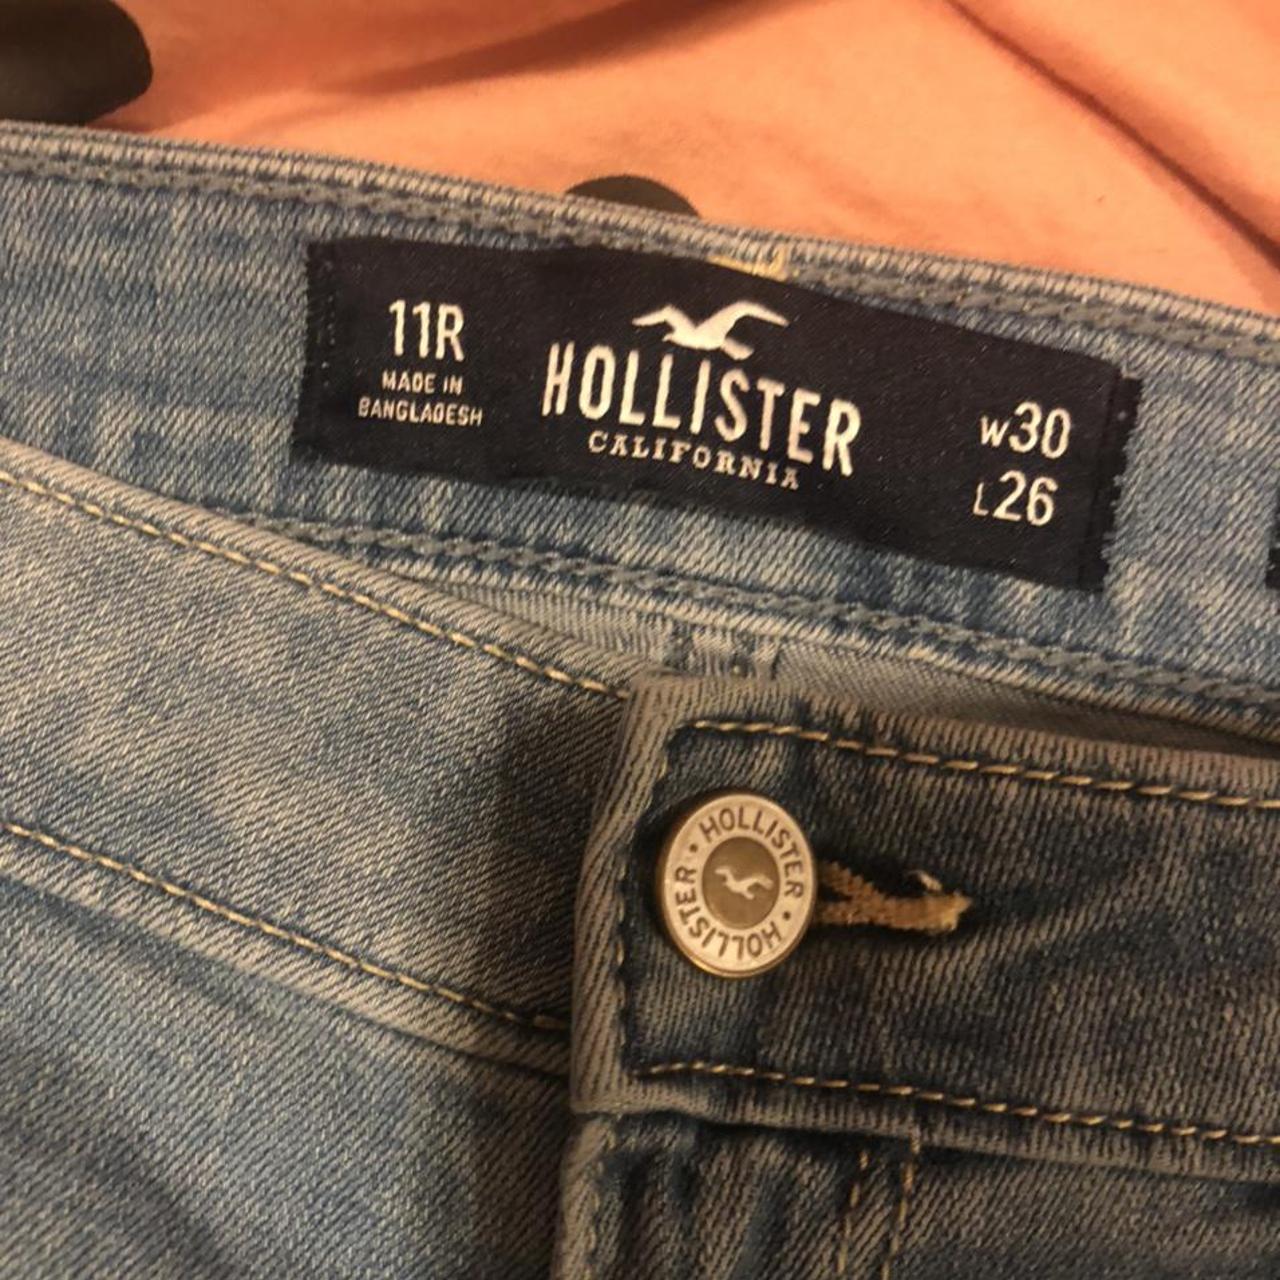 Product Image 2 - Brand new hollister high rise